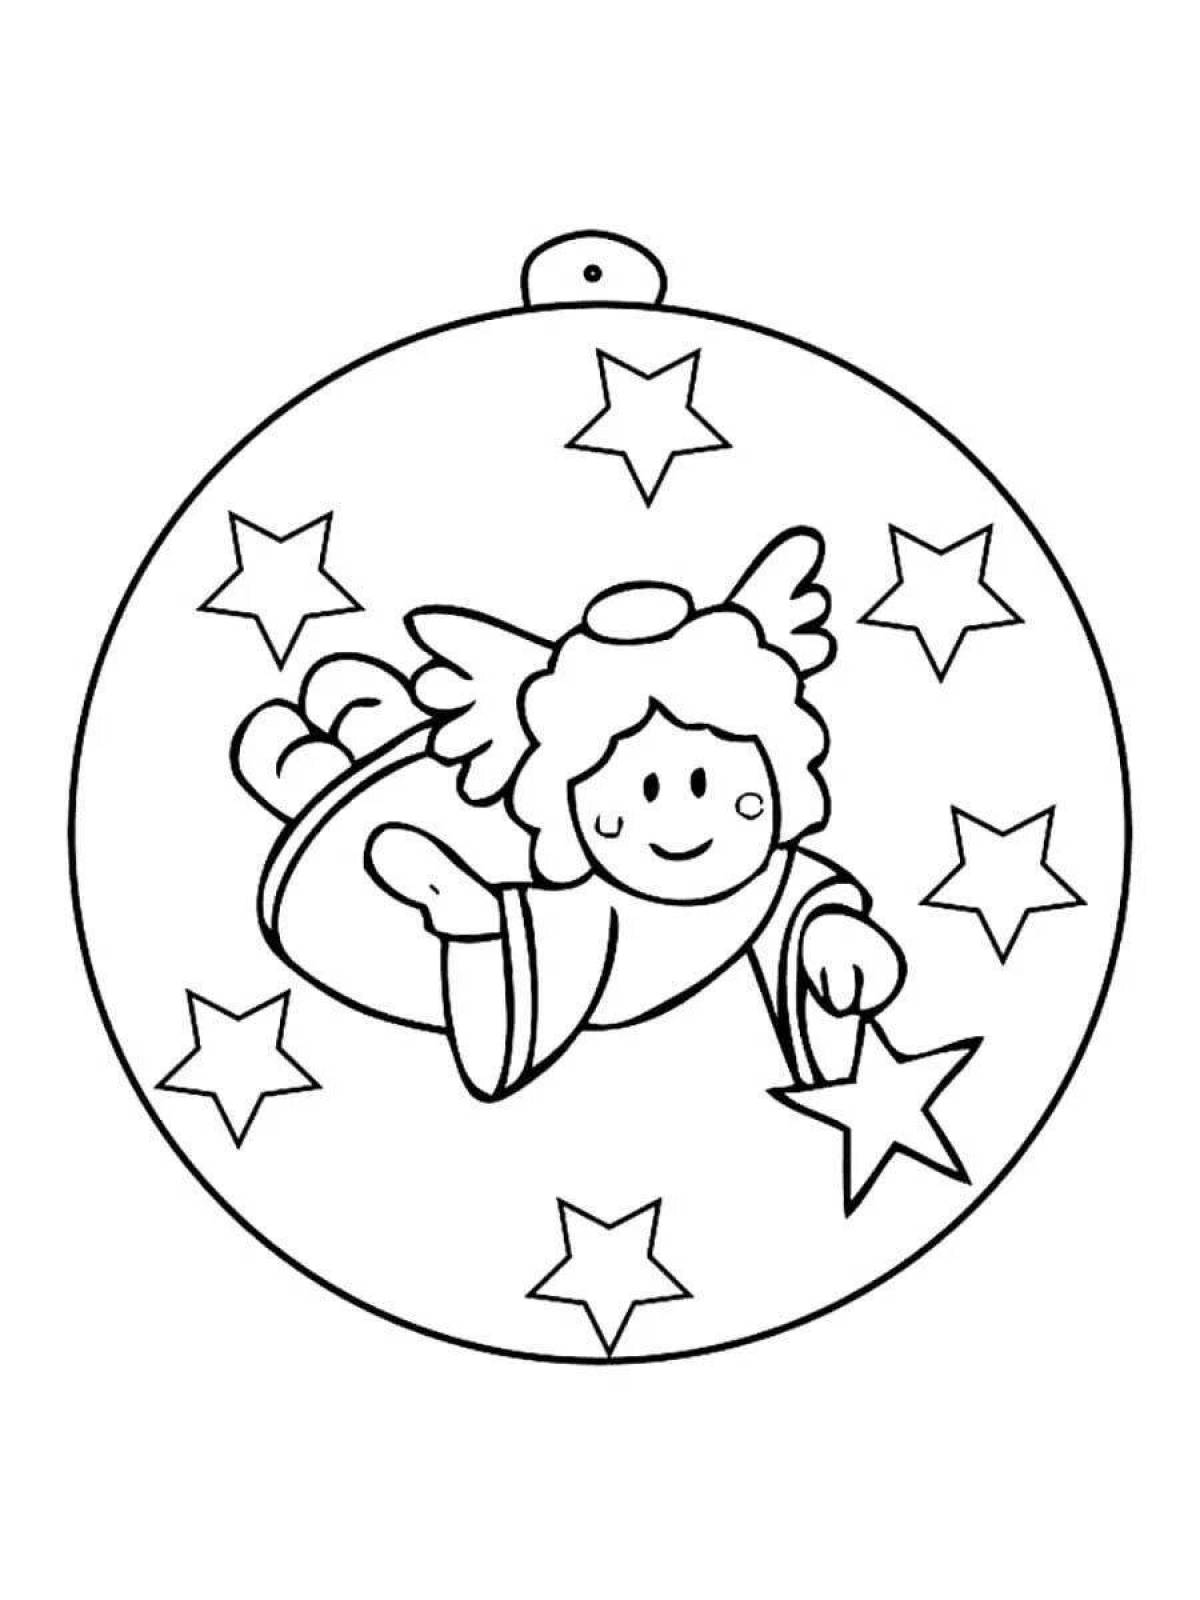 Gorgeous Christmas toy ball coloring page